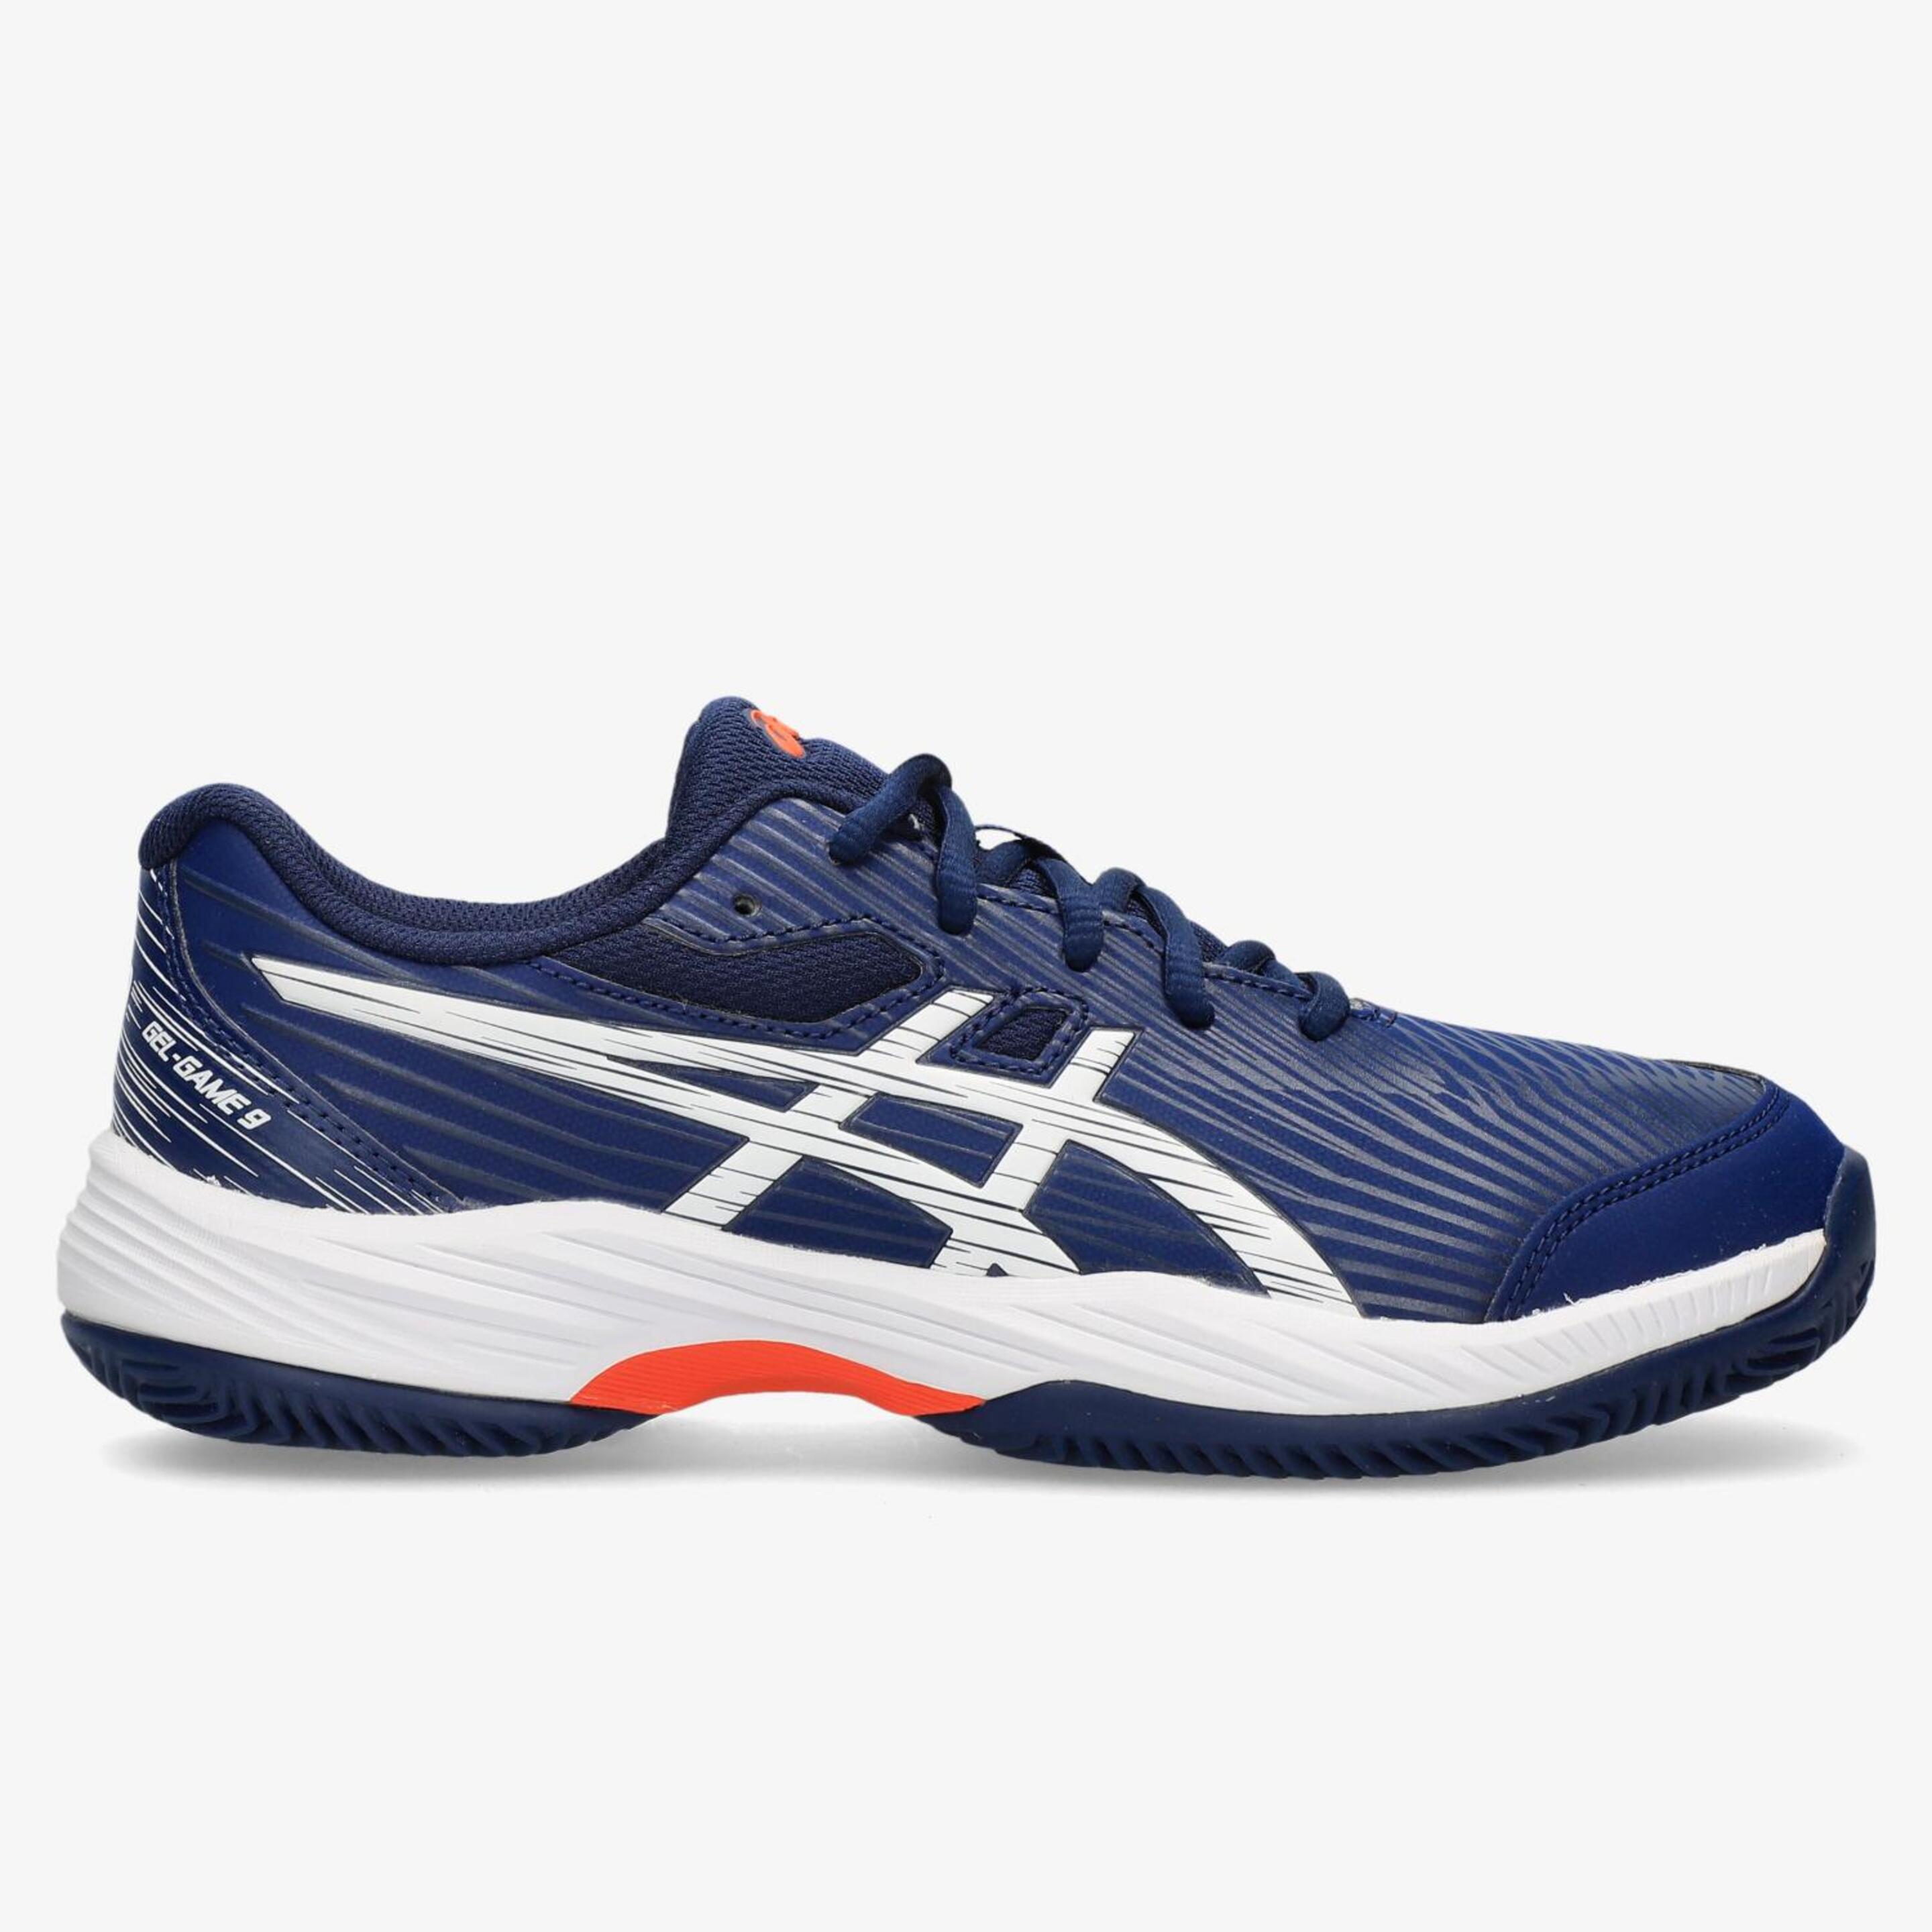 ASICS Gel-game 9 Gs Clay